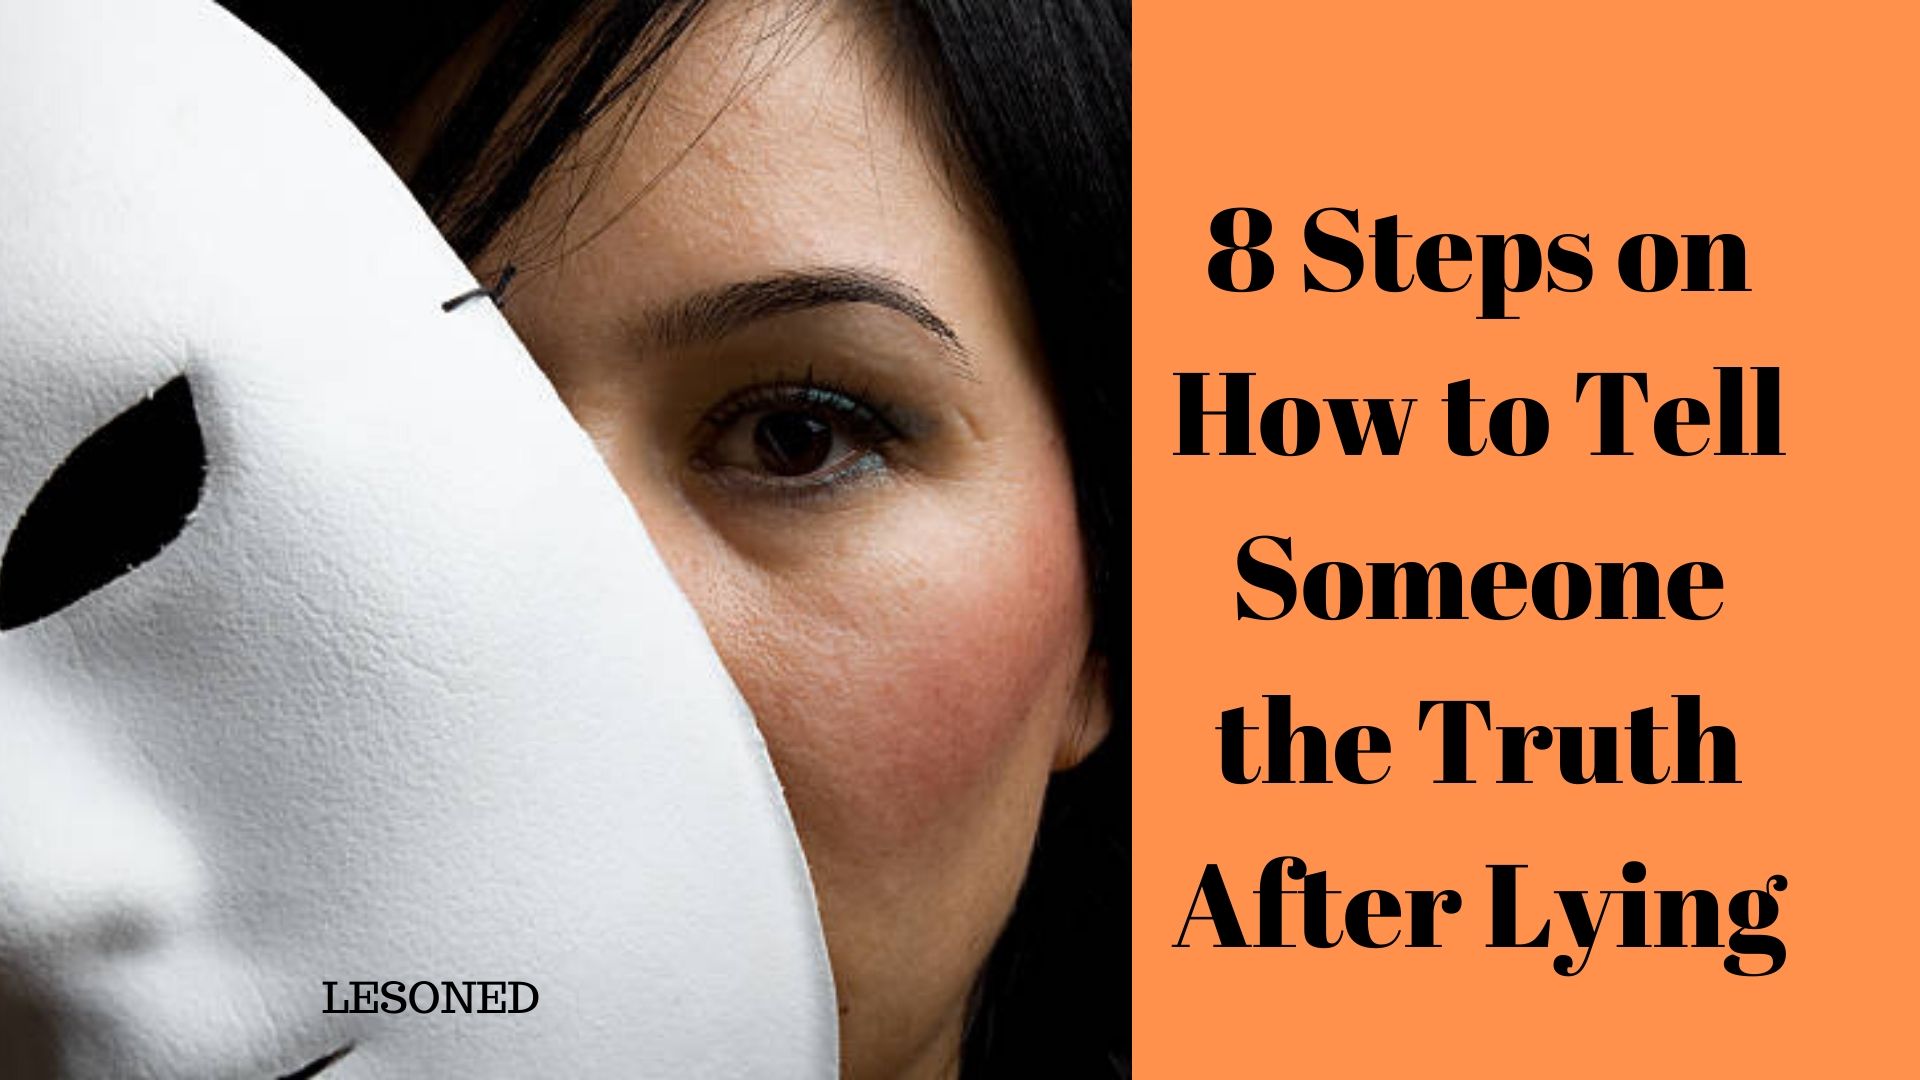 8 steps on how to tell the truth to someone after lying to them